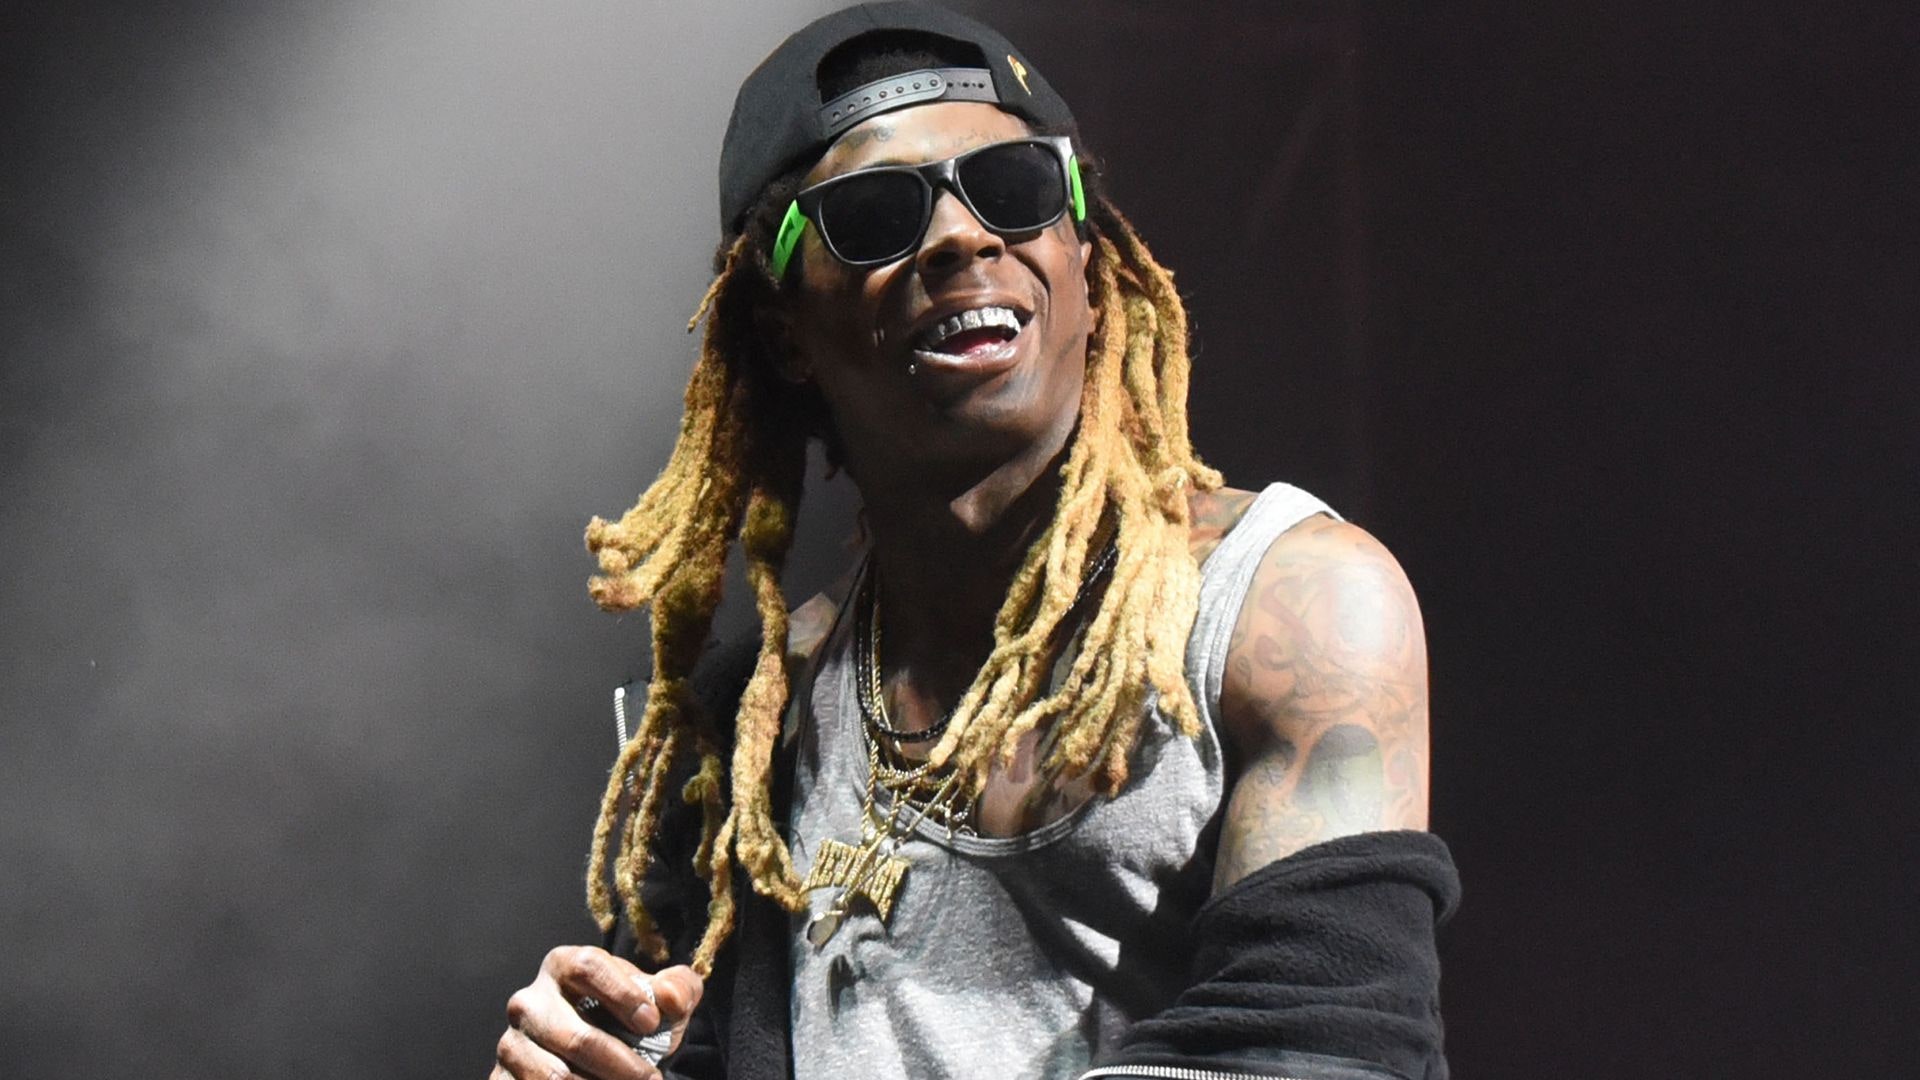 Lil Wayne is more than a rapper, he's a seasoned writer too, and he's written a hilarious prison diary